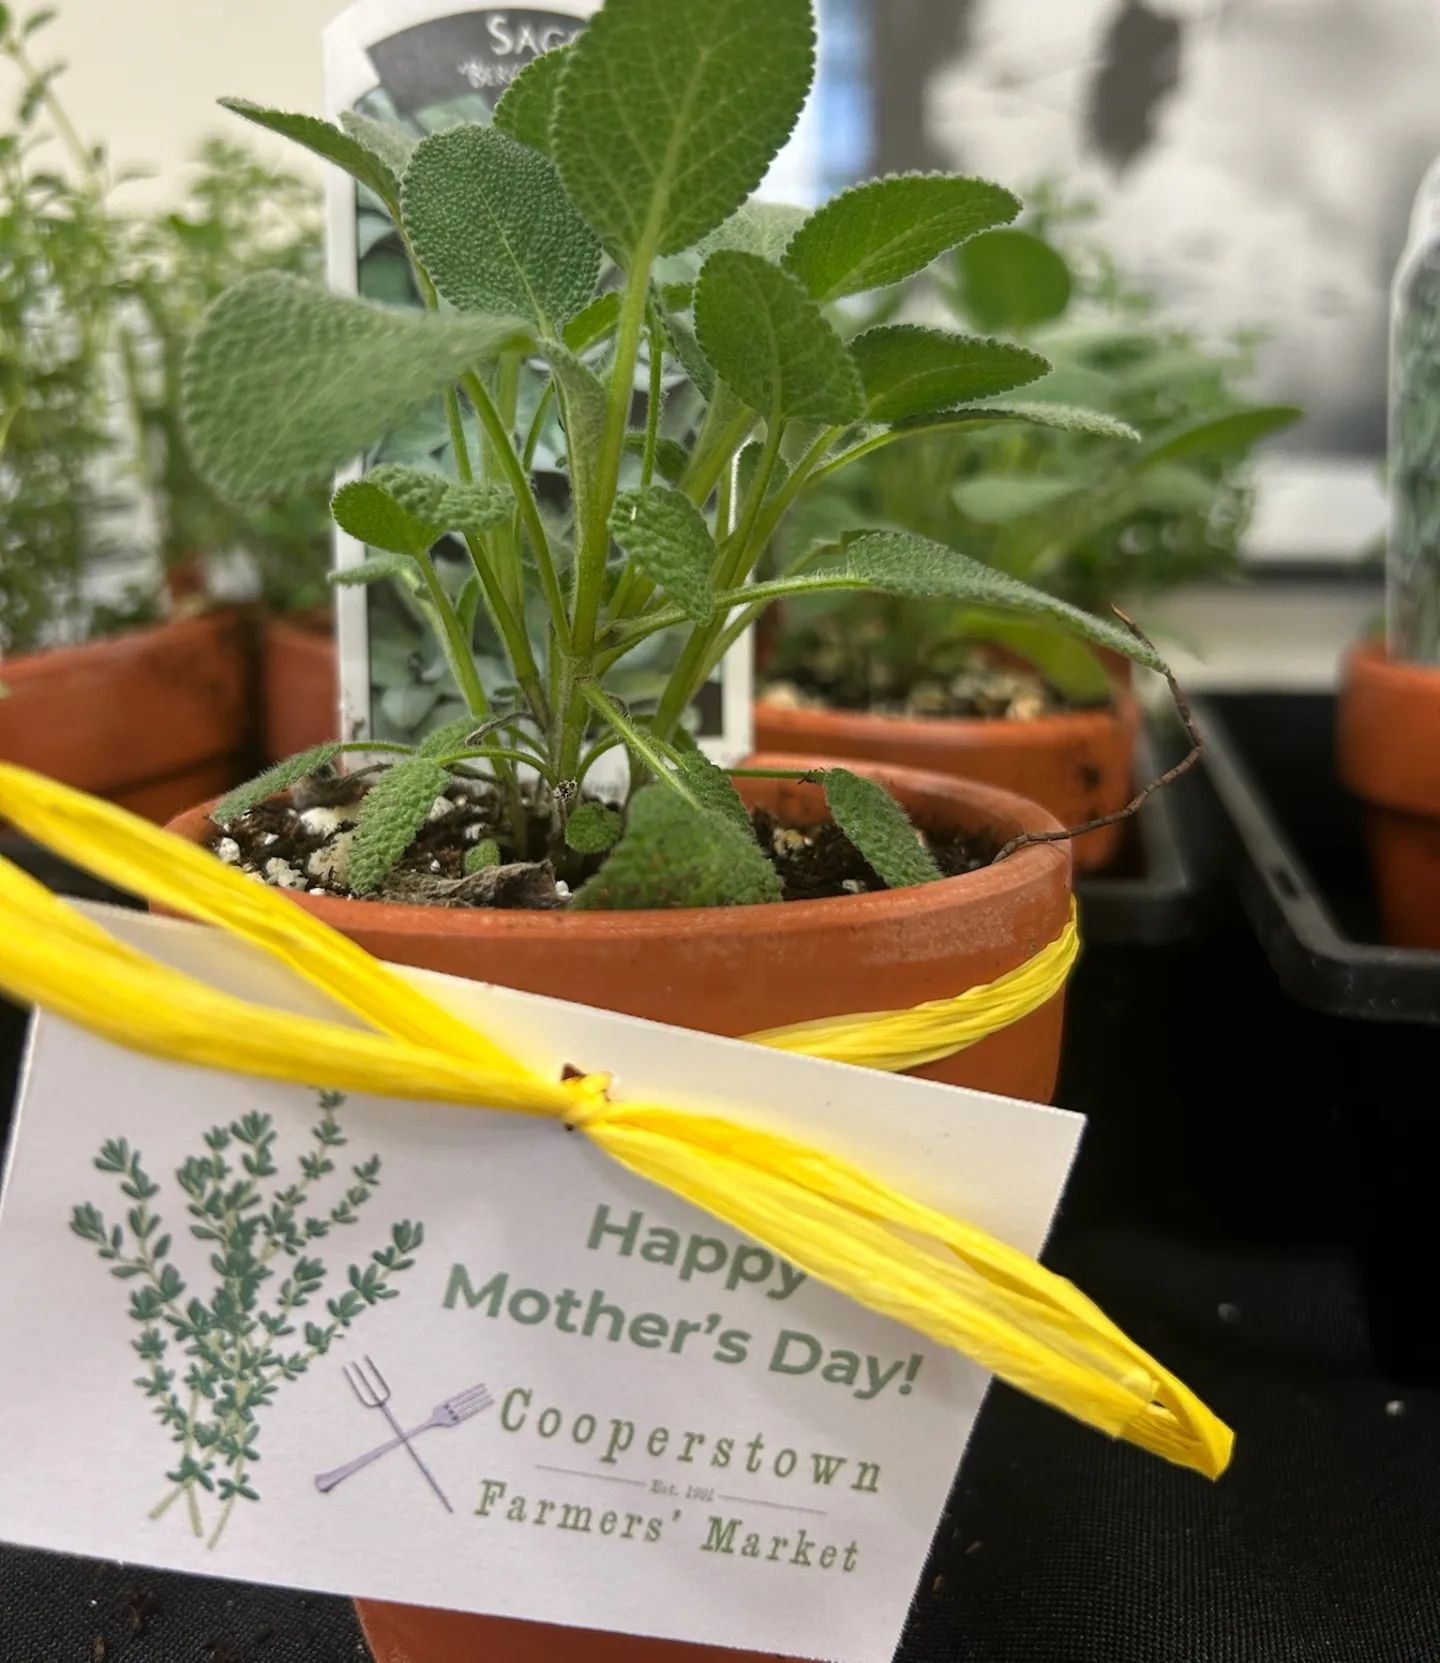 Shop the Market for Mother's Day and everyday! Remember we open at 9 am now, and we have a free gift for the first 50 Moms!
Herbs from ARK Floral 

#farmersmarket #giftsformom